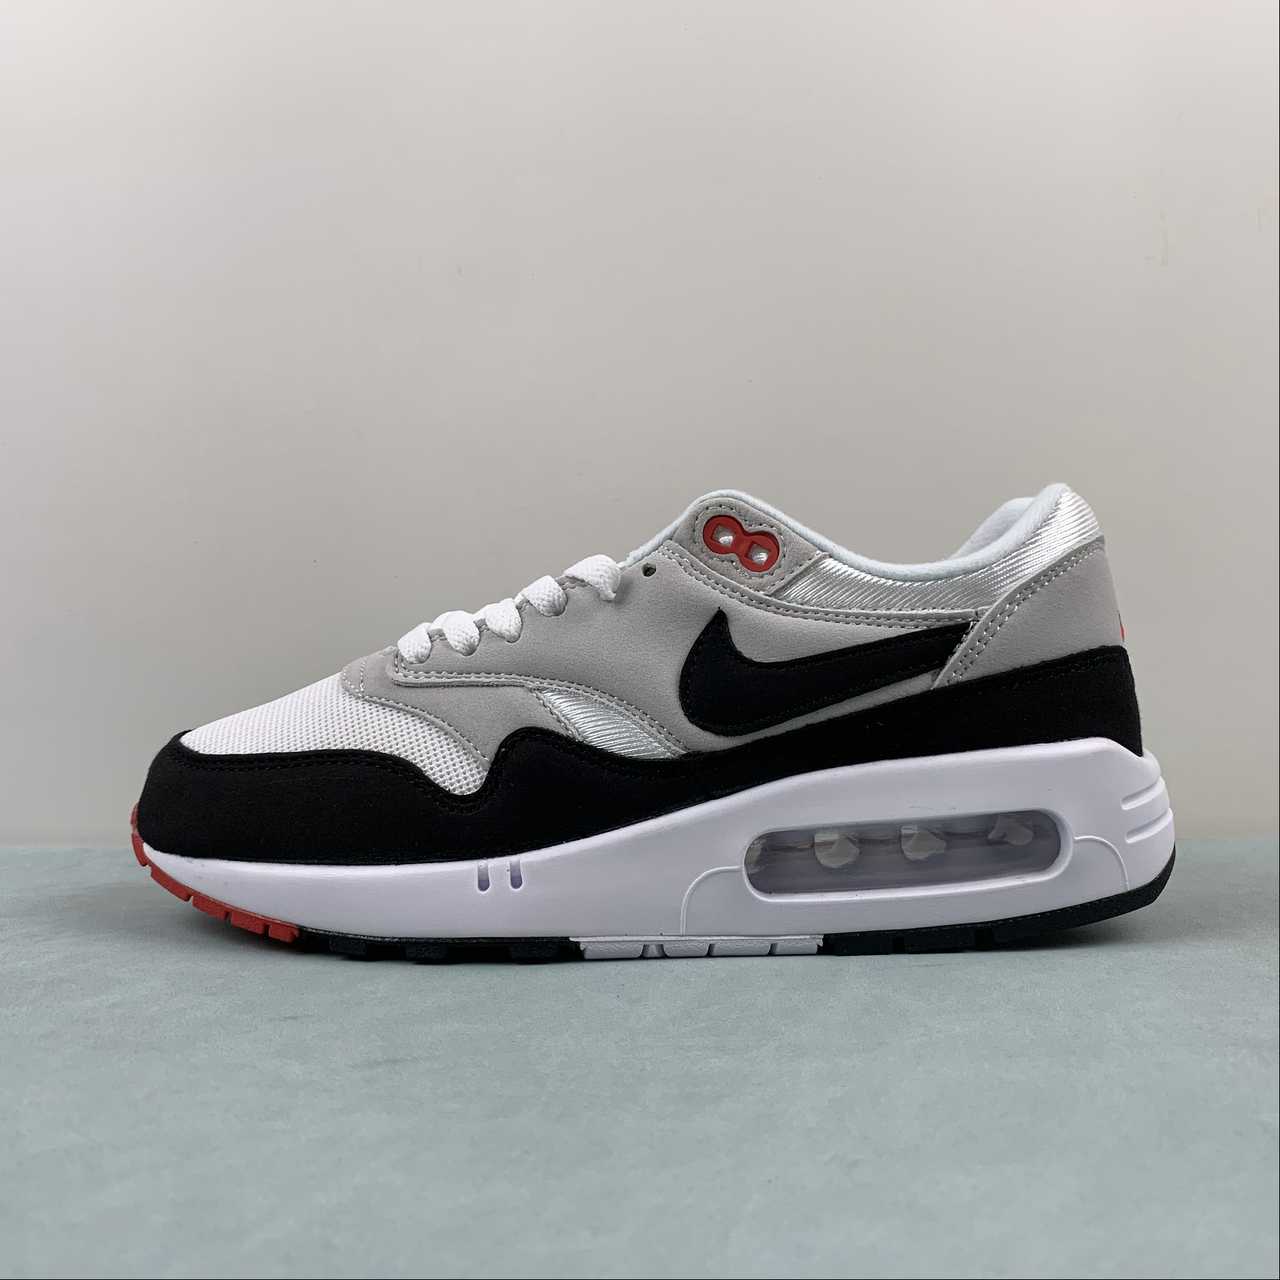 nike stain air max moire gray black dress images